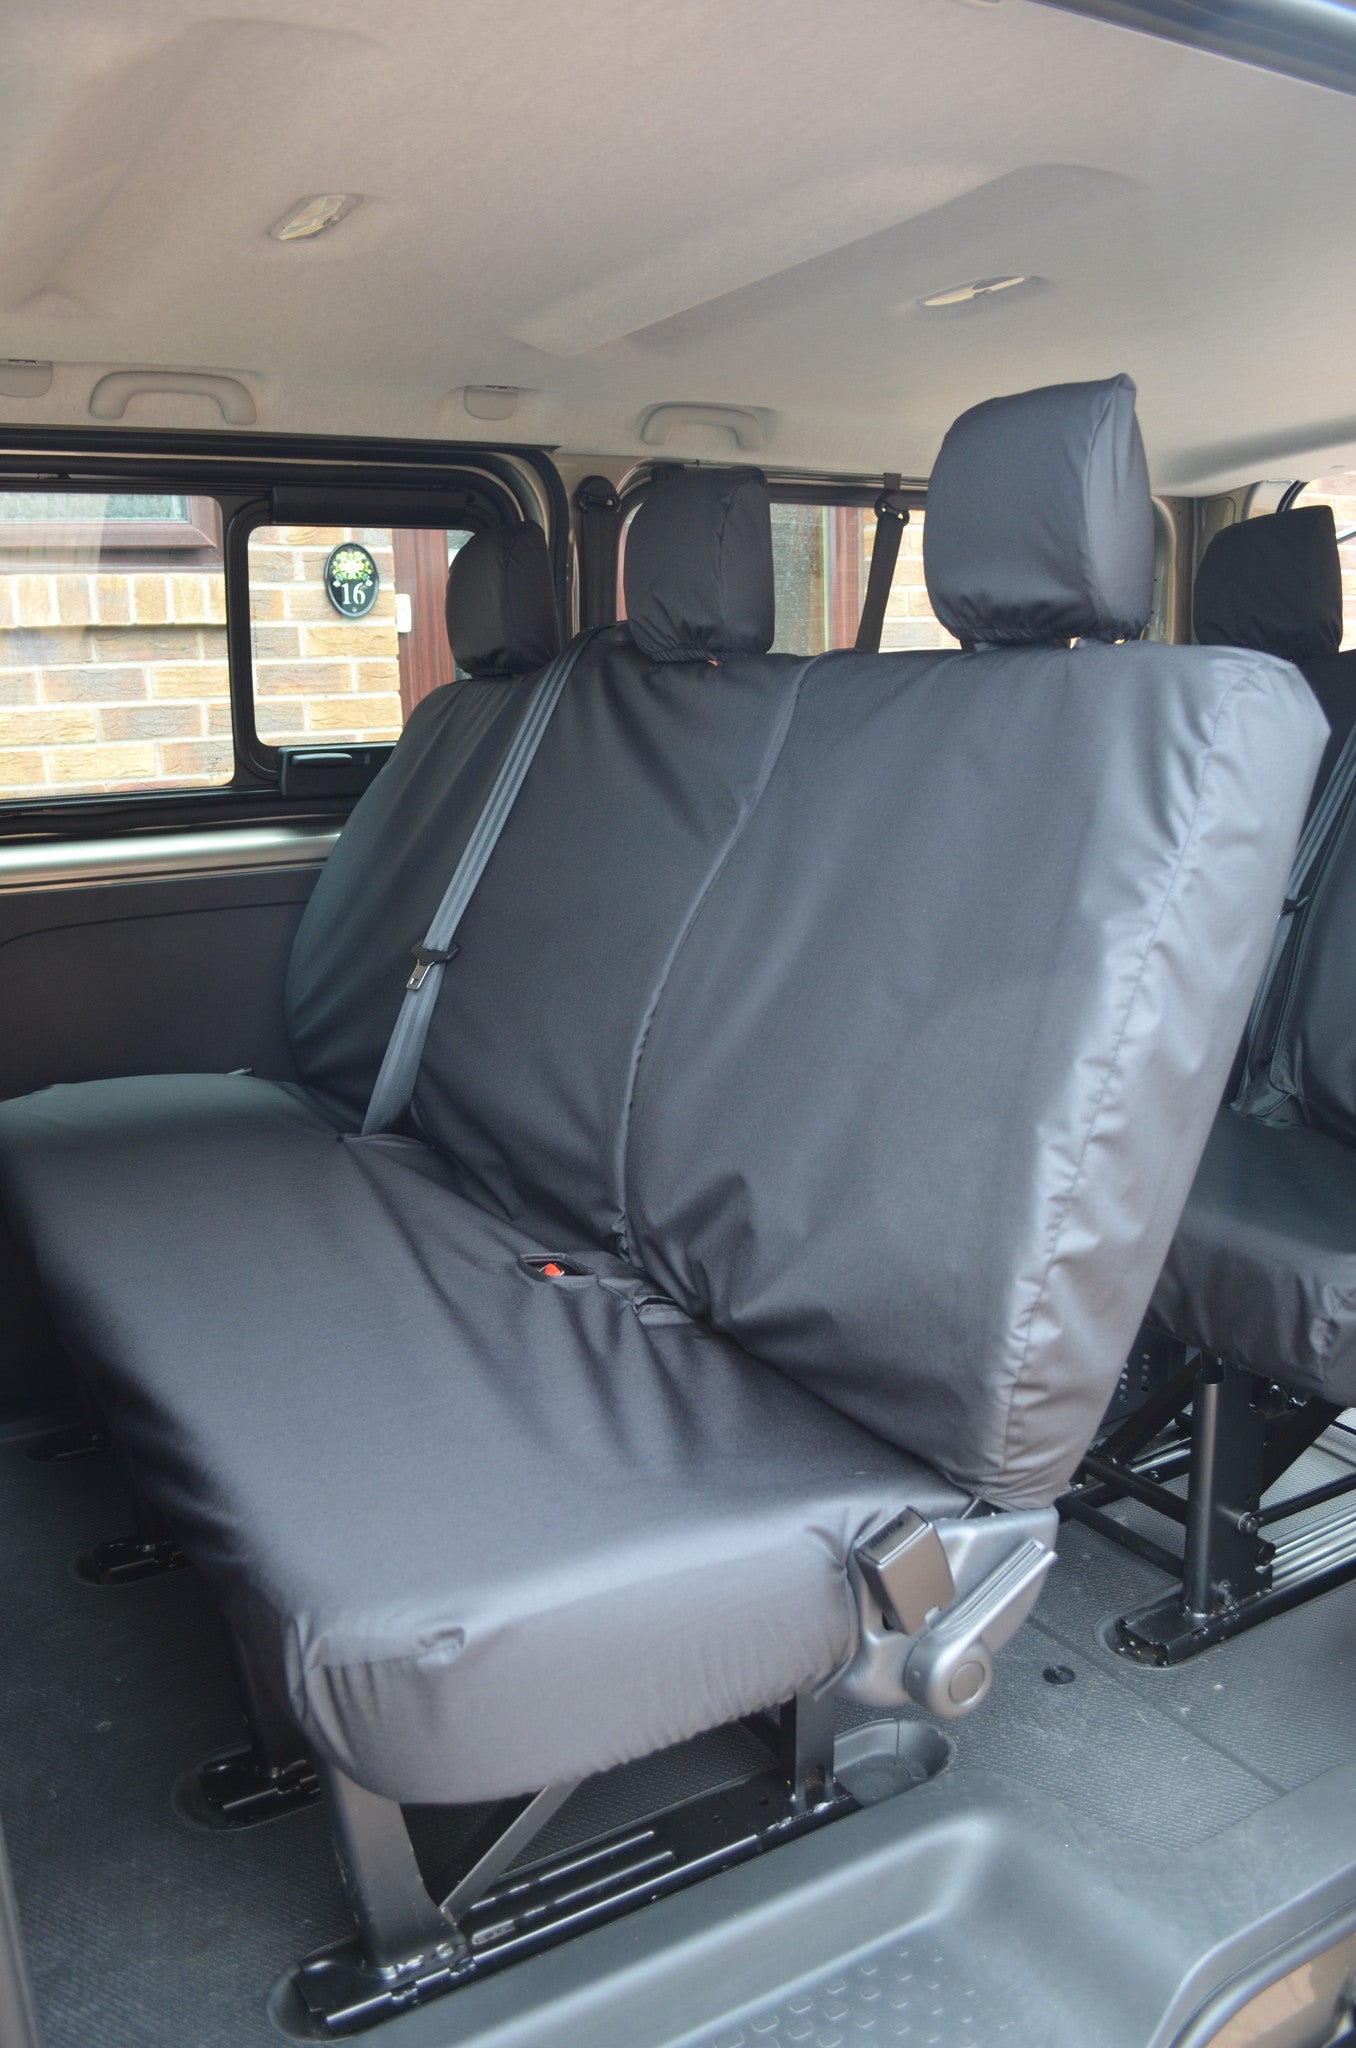 Renault Trafic Passenger 2001 - 2006 Seat Covers  Turtle Covers Ltd